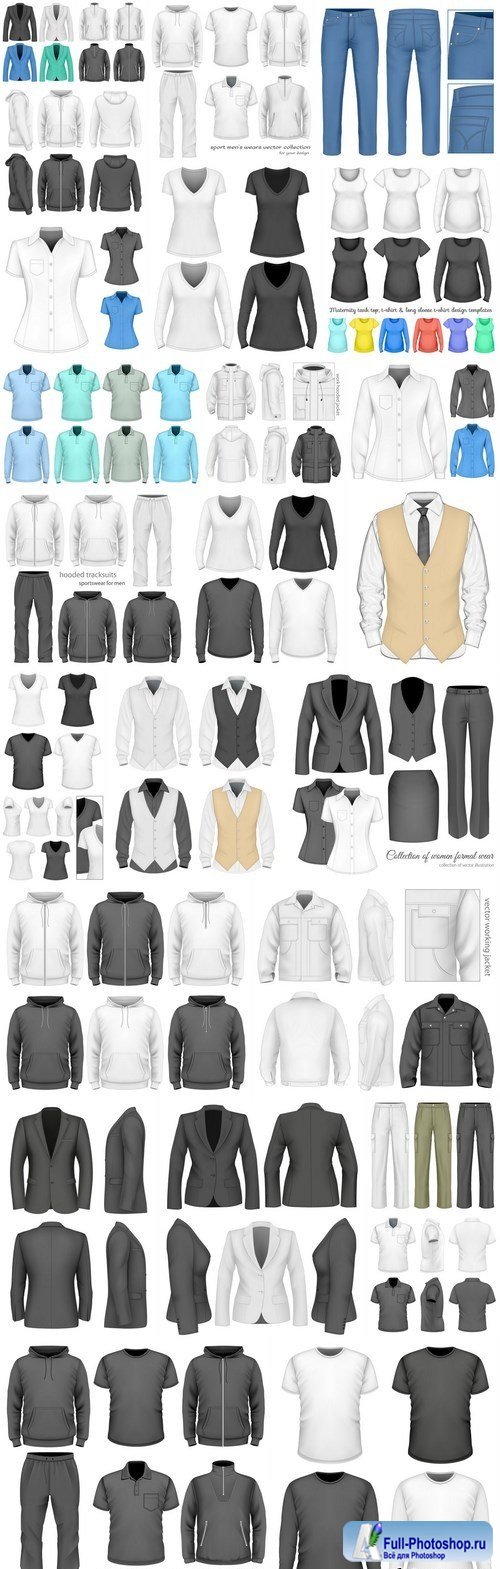 Mockup Clothes Collection - 26 Vector